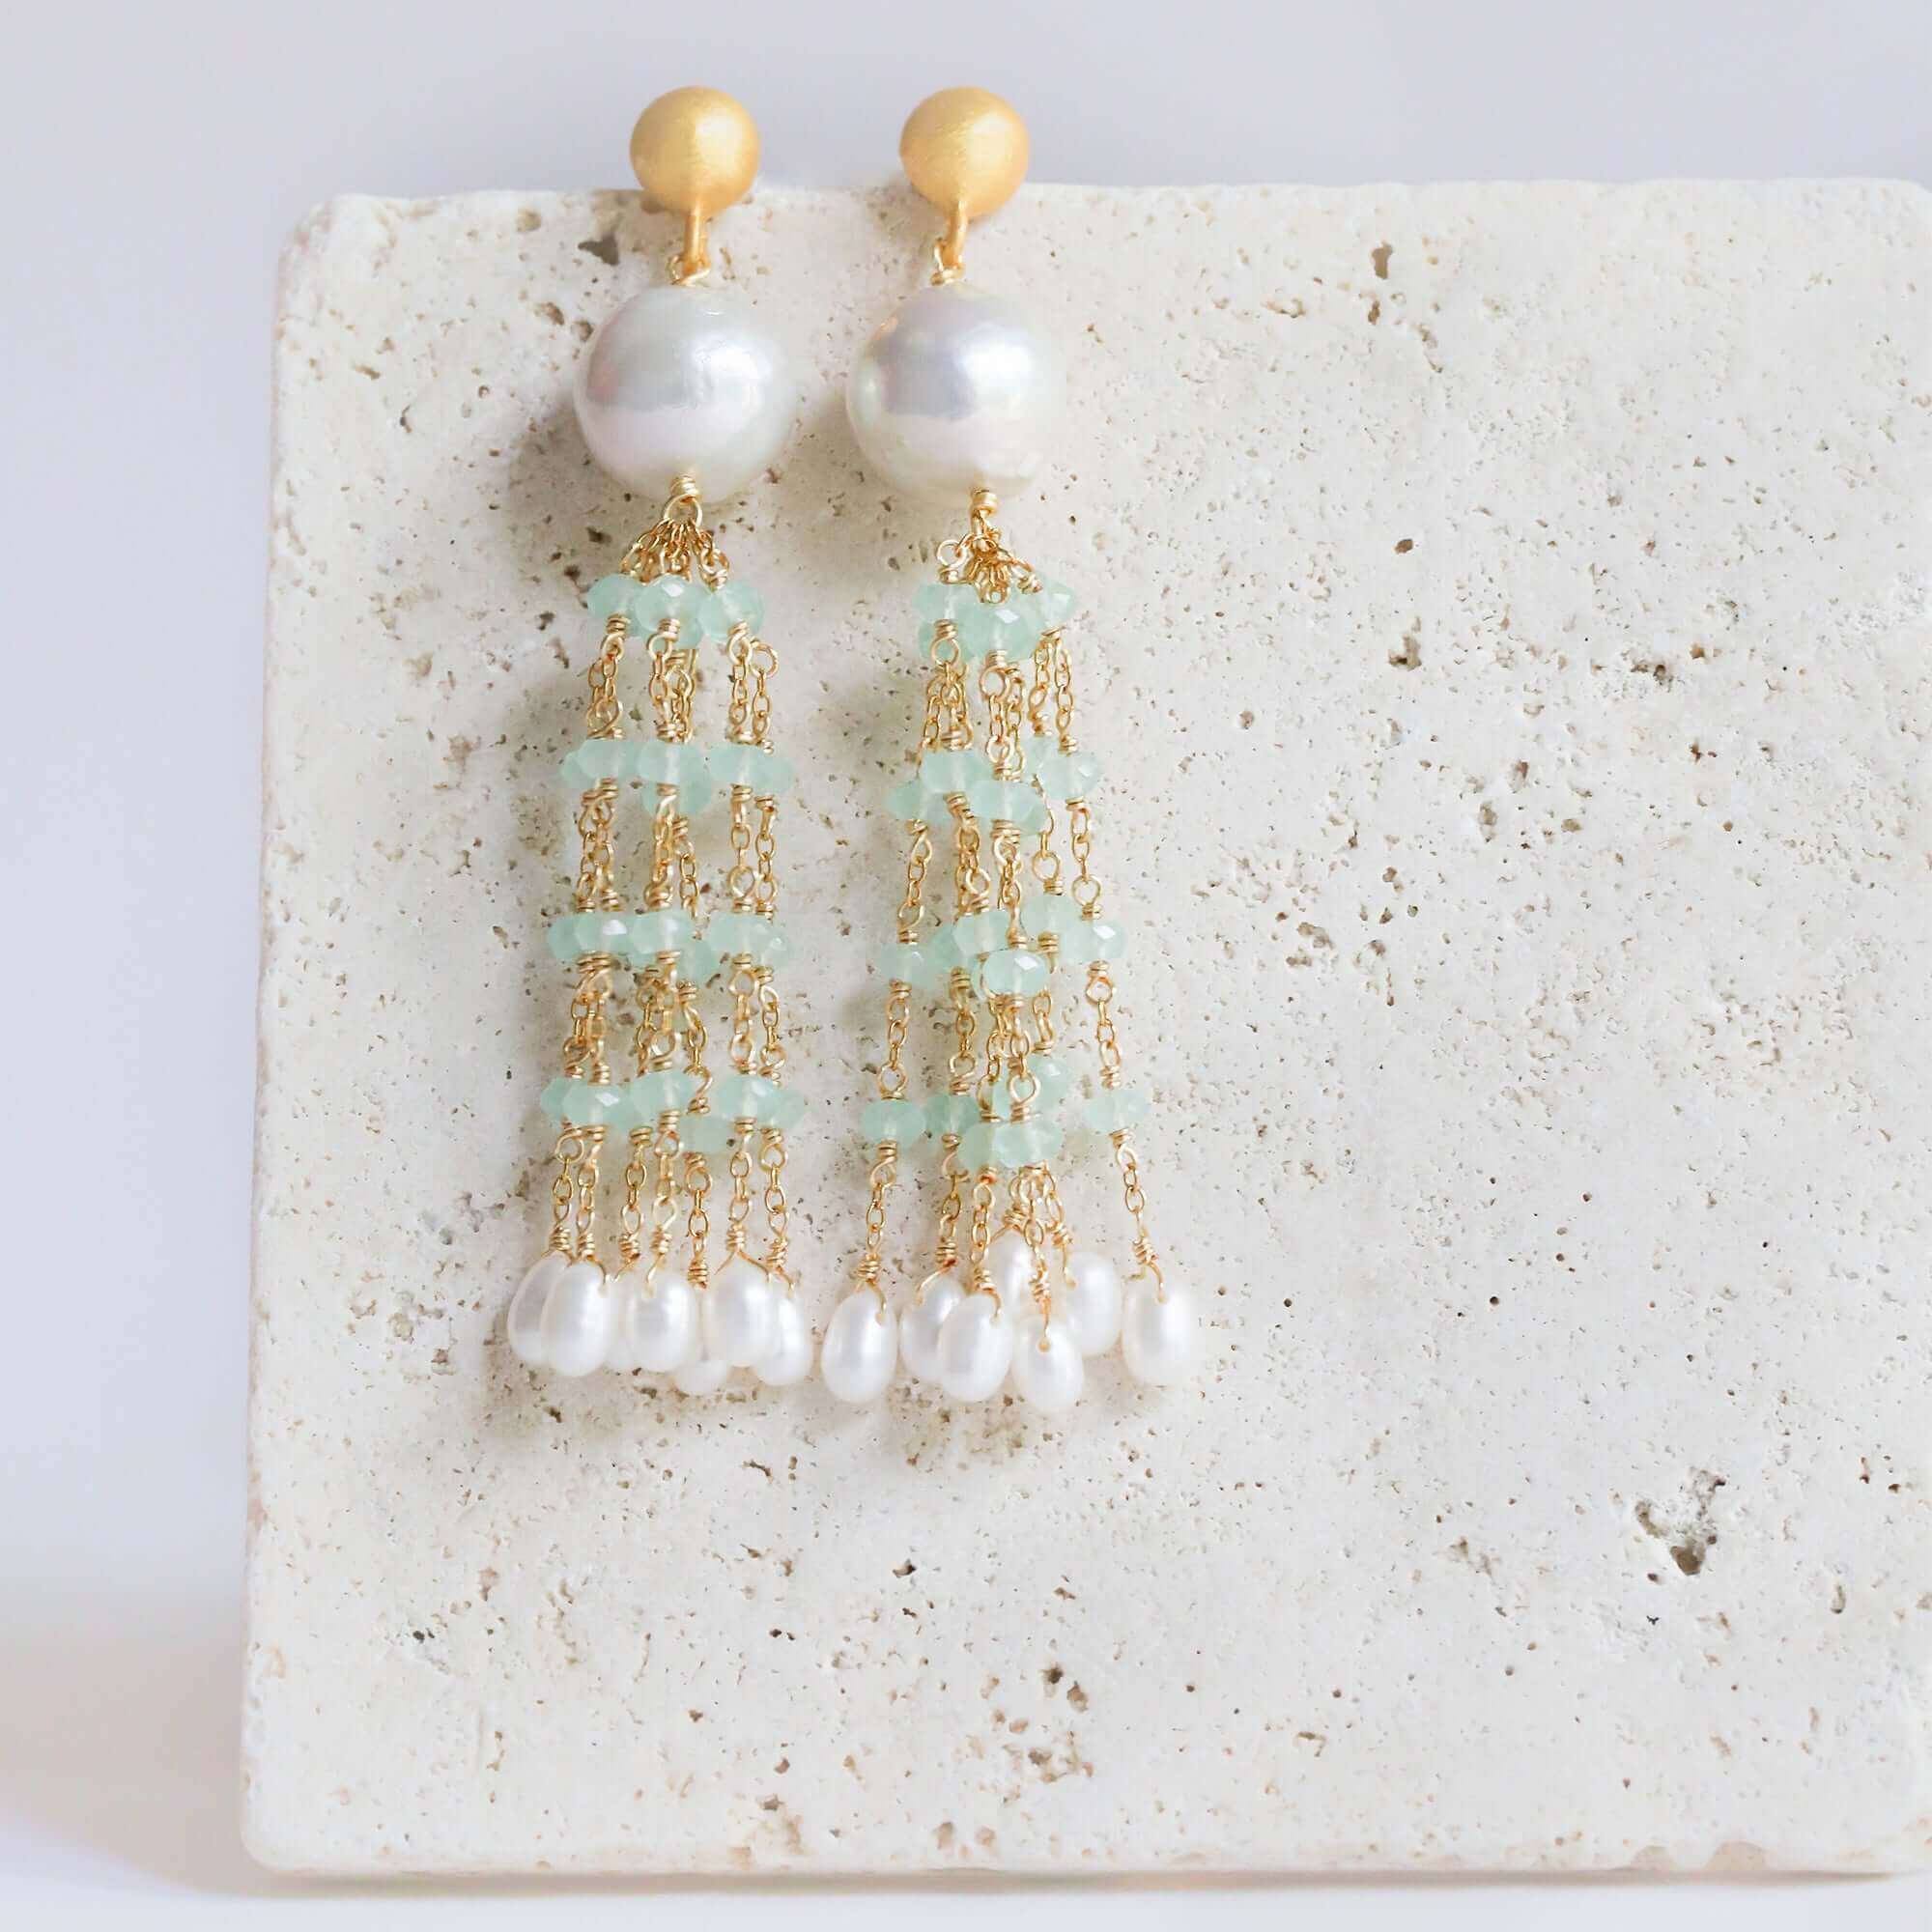 Freshwater baroque pearls, aqua chalcedony and bead pearls Tassel Earrings in Gold plated Italian Silver